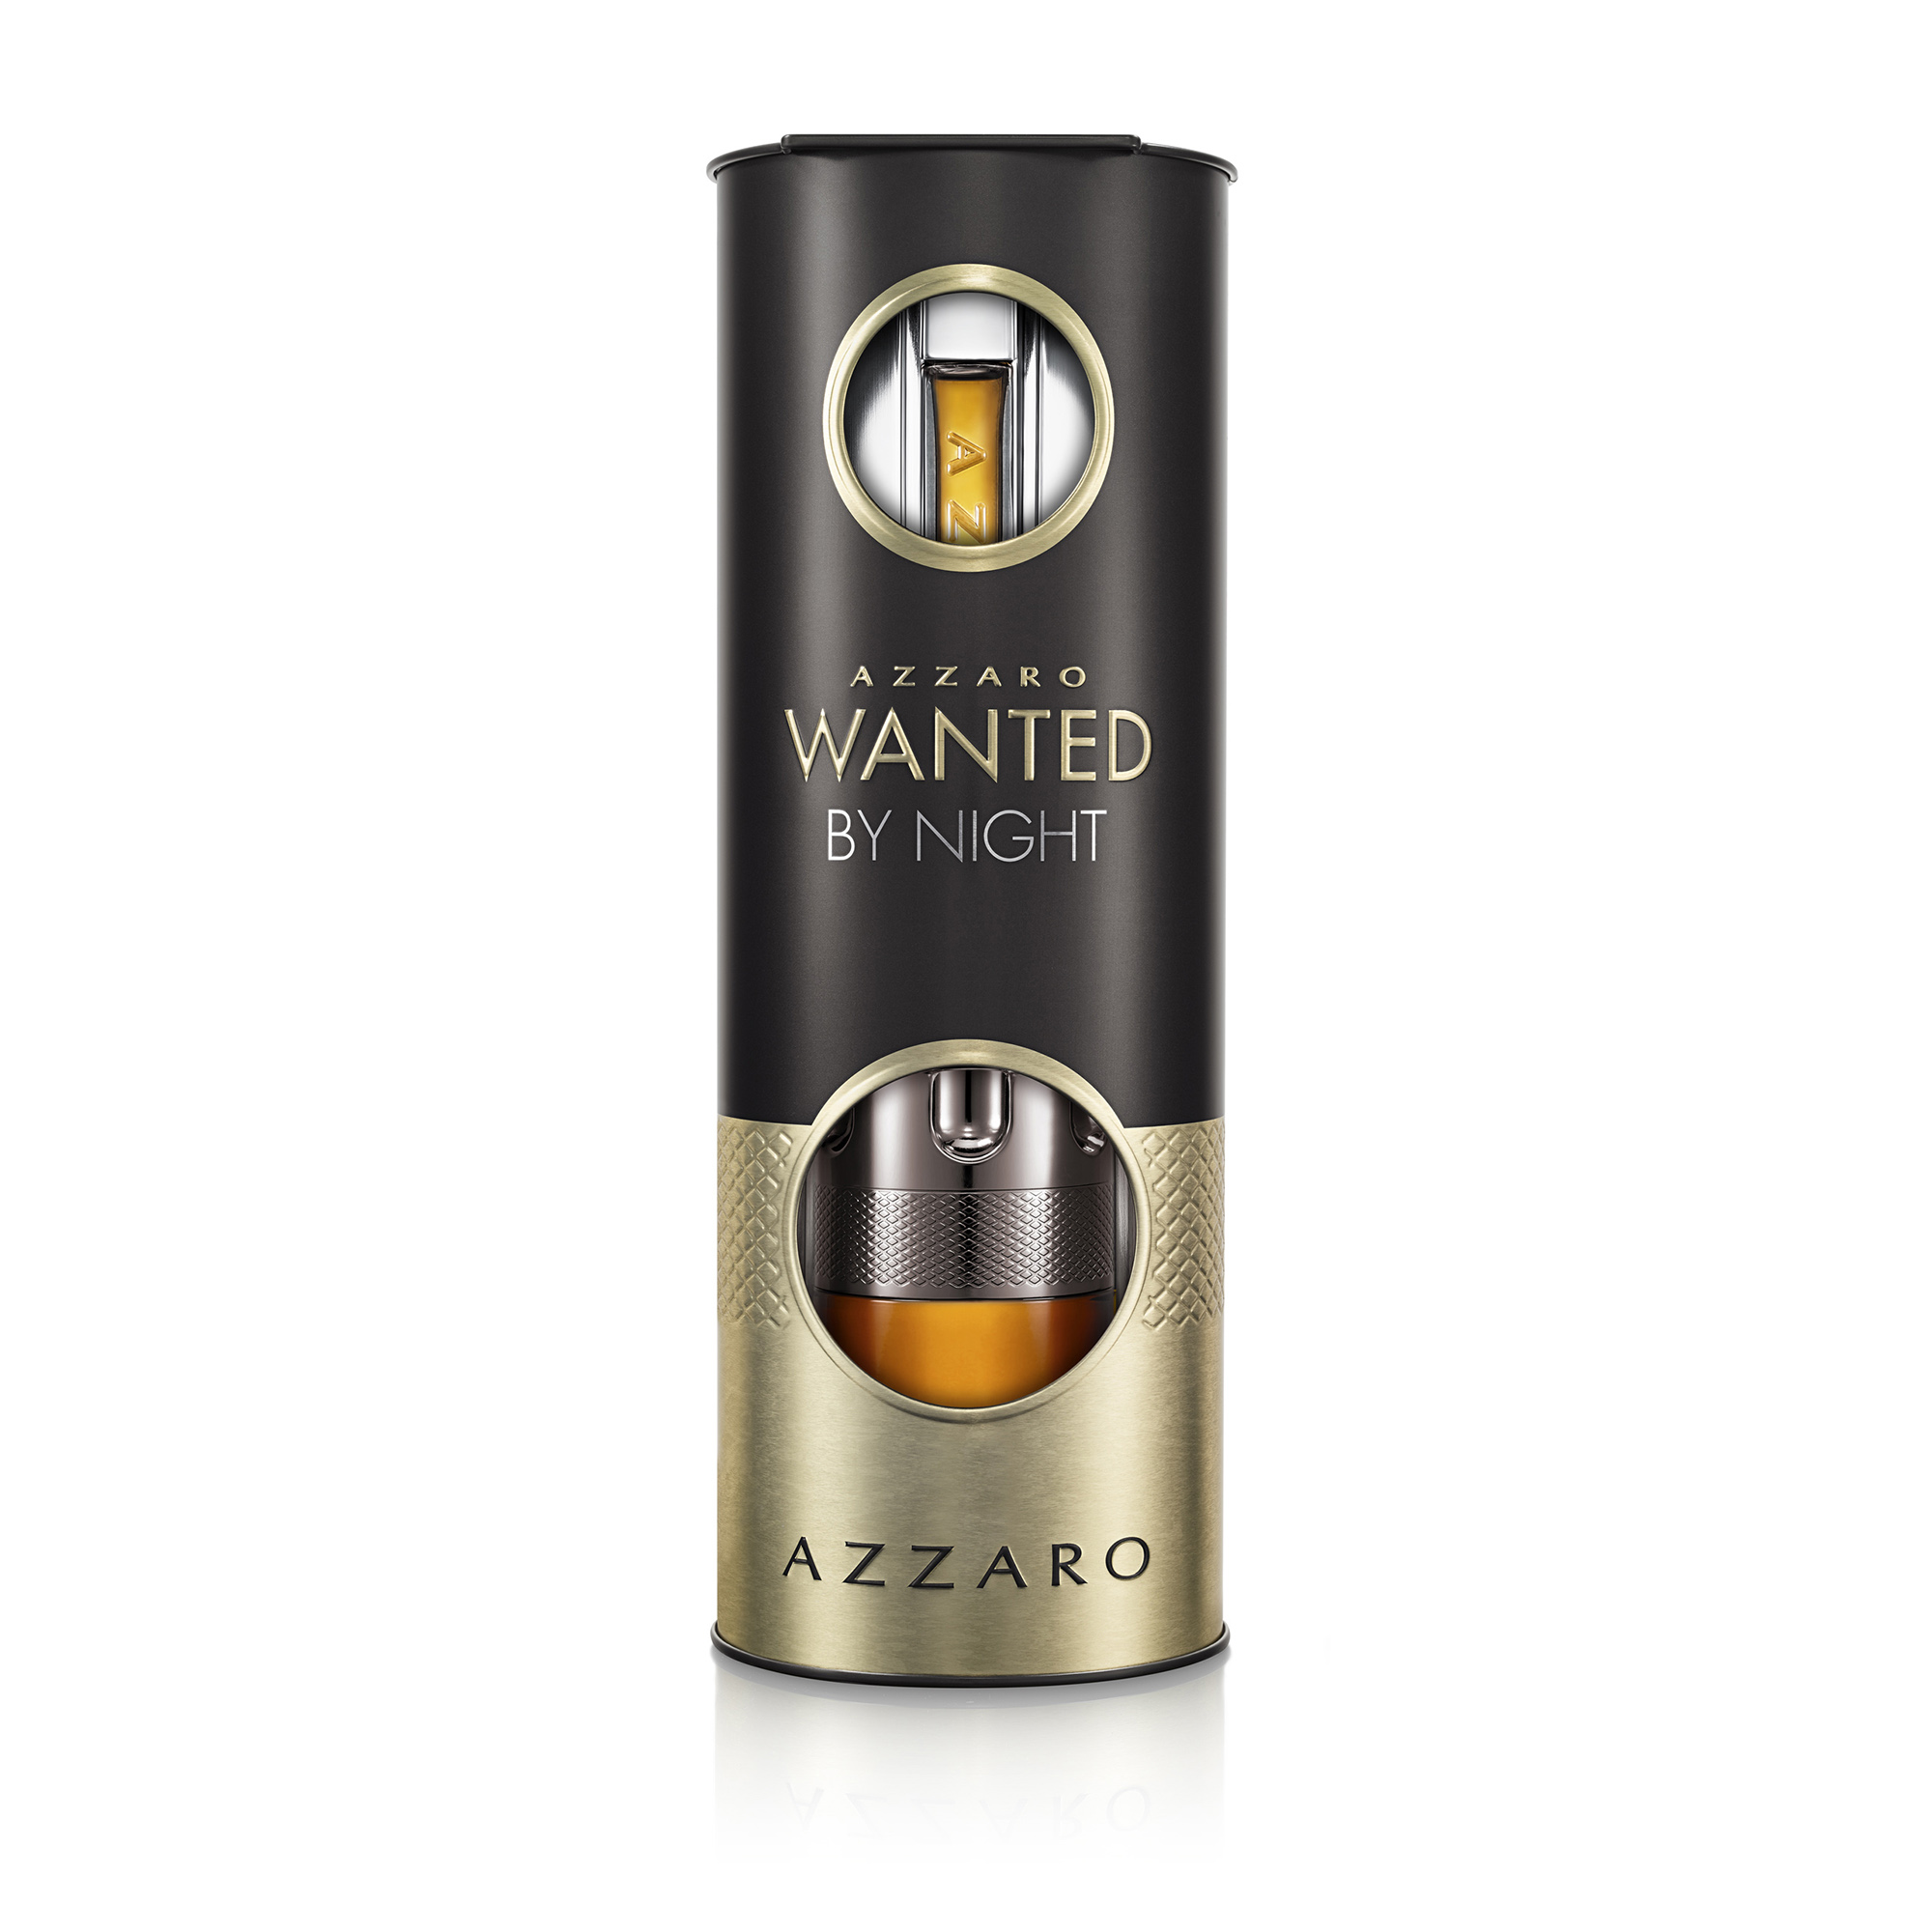 Maria Queralt Packshot Azzaro Wanted By Night